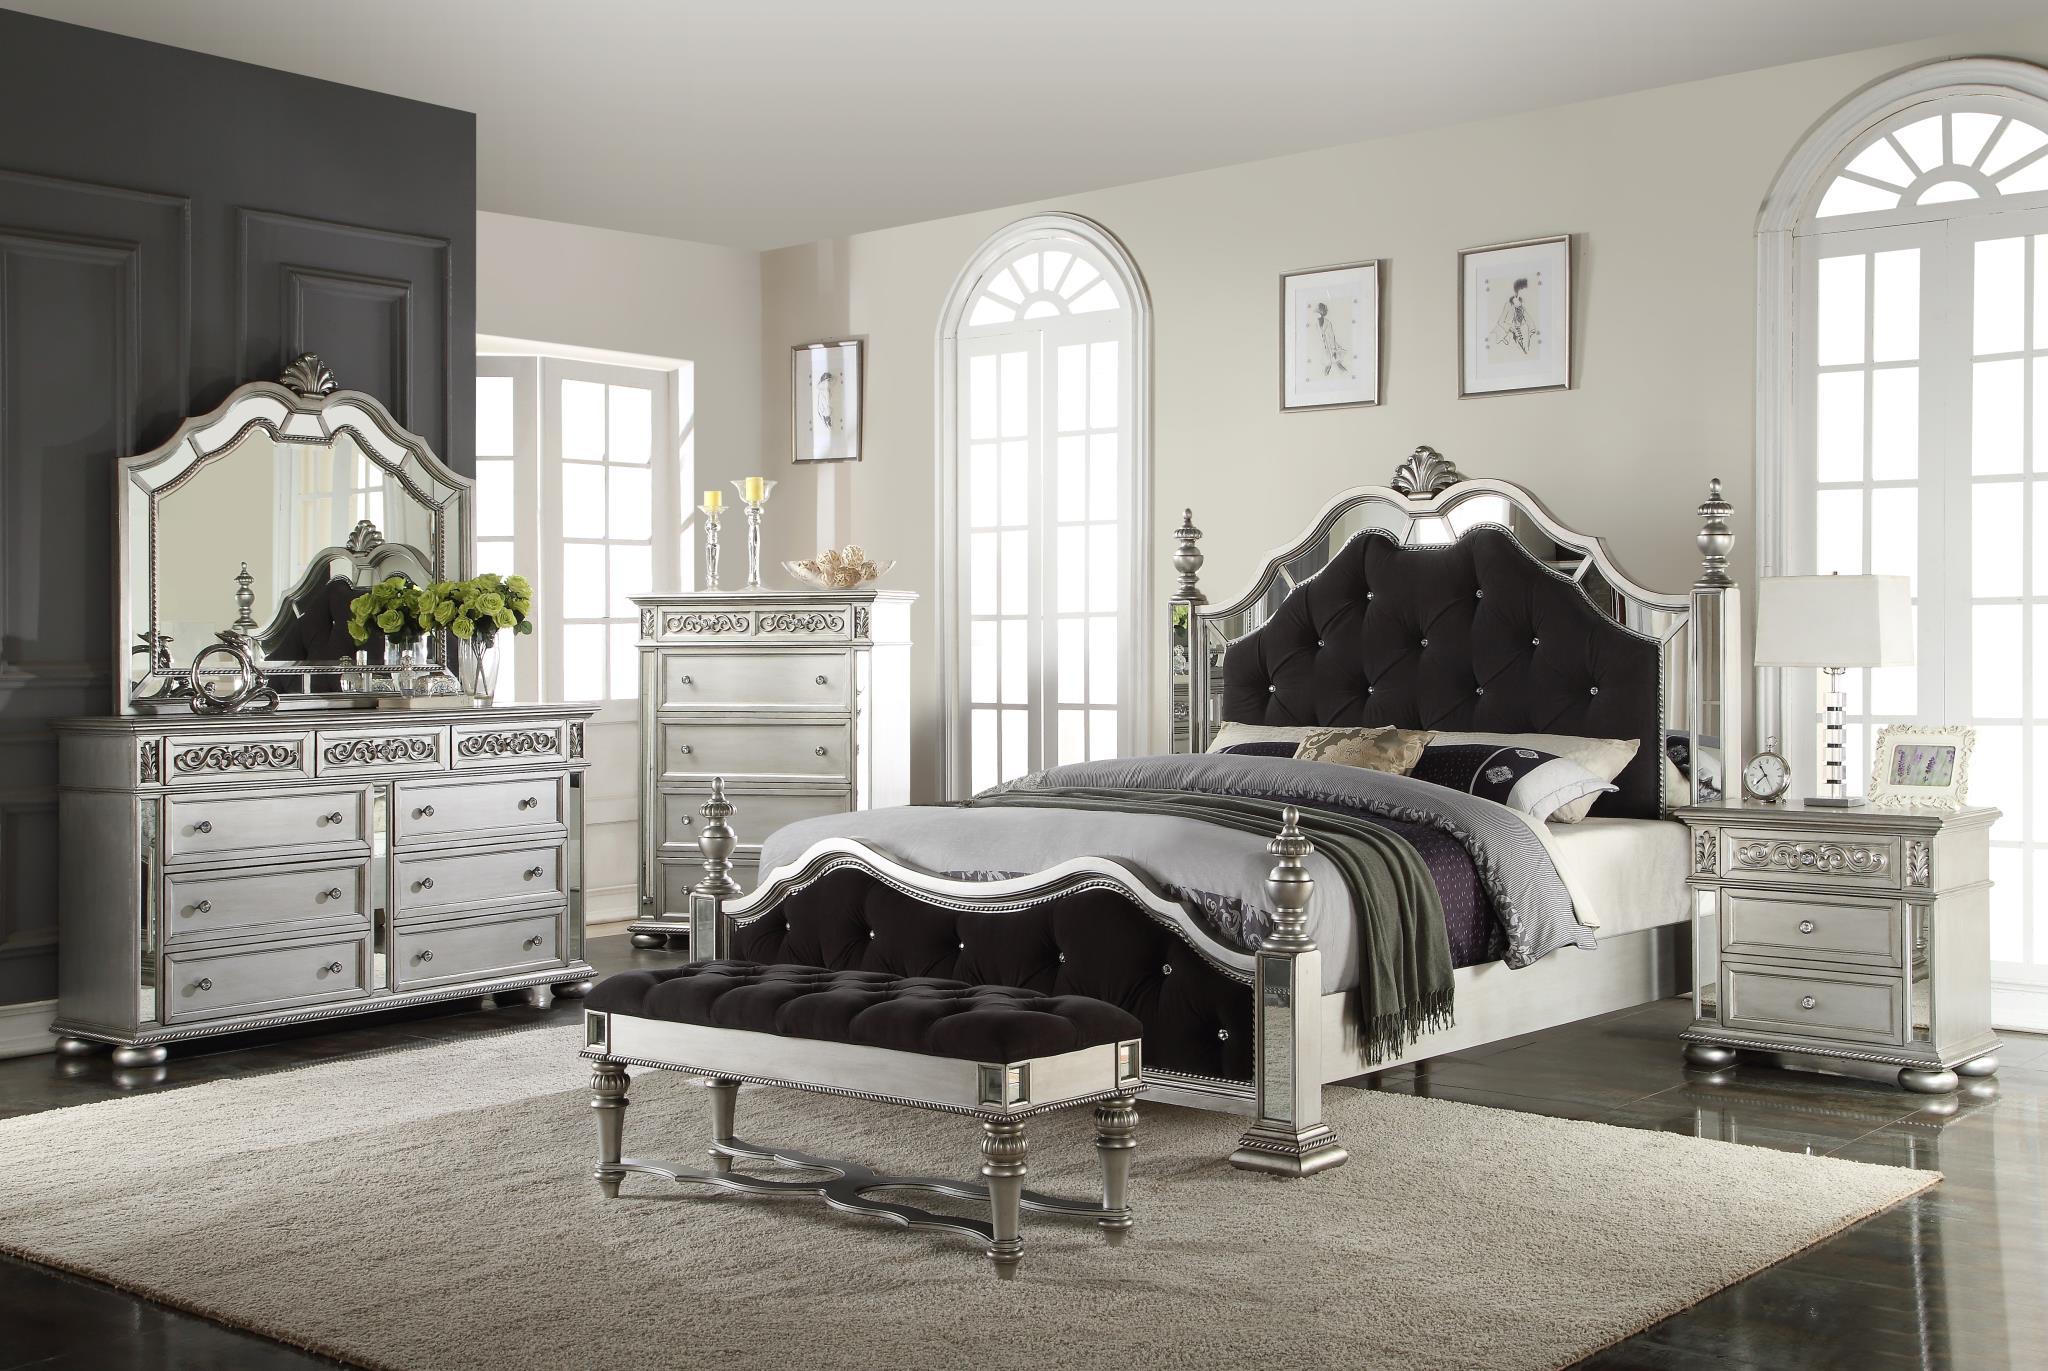 

    
Glam Black Silver & Mirror King Poster Bed Contemporary McFerran B1722
